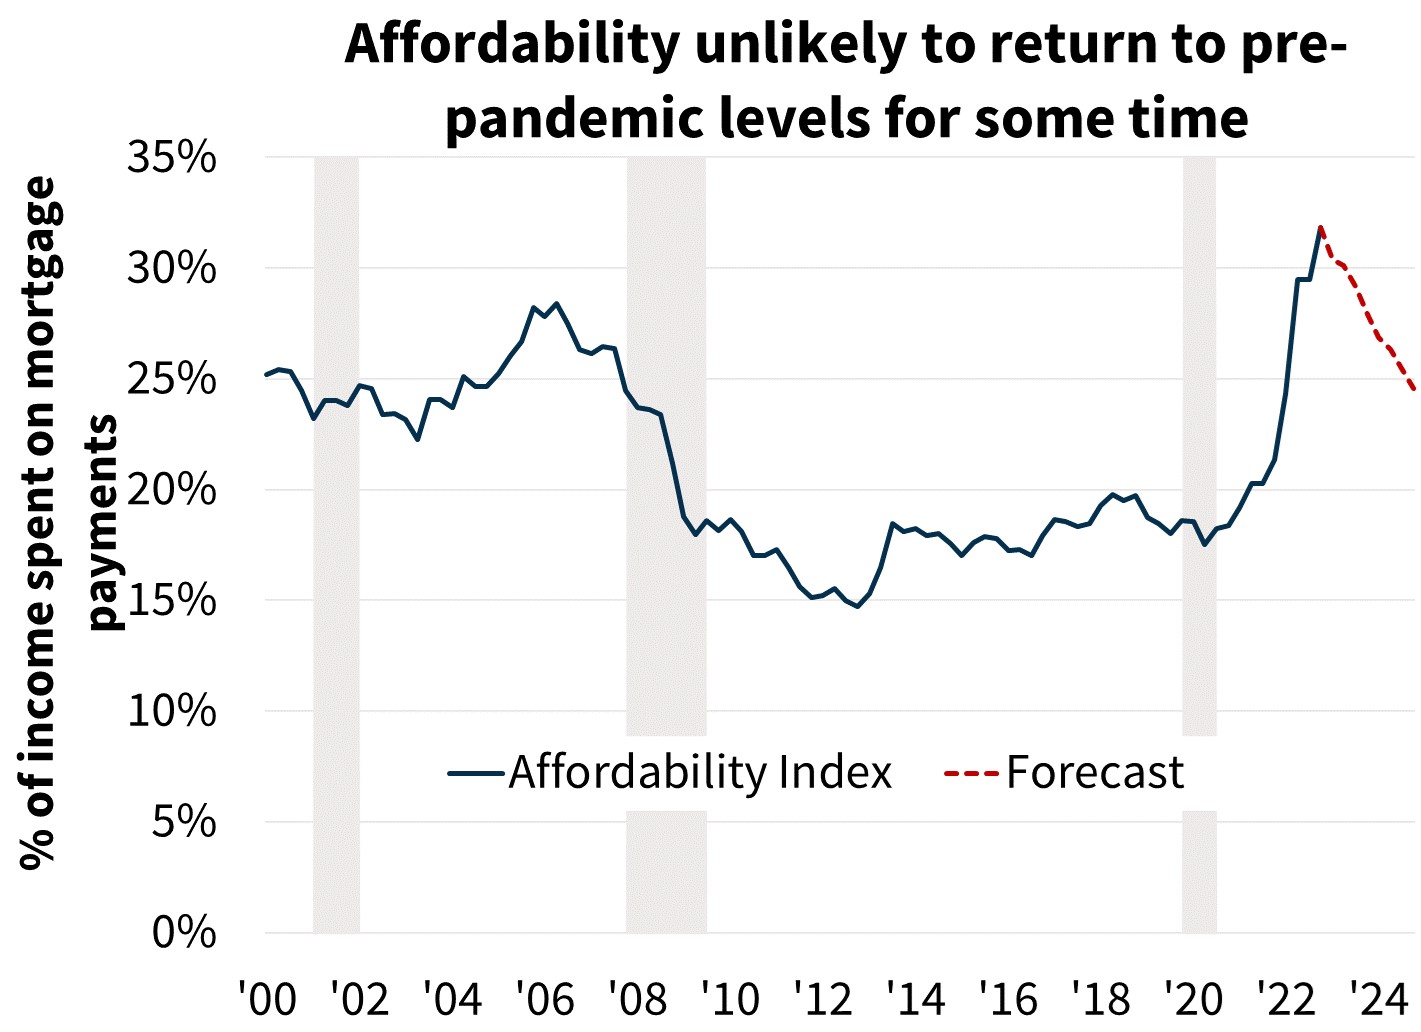  Affordability unlikely to return to pre-pandemic levels for some time 